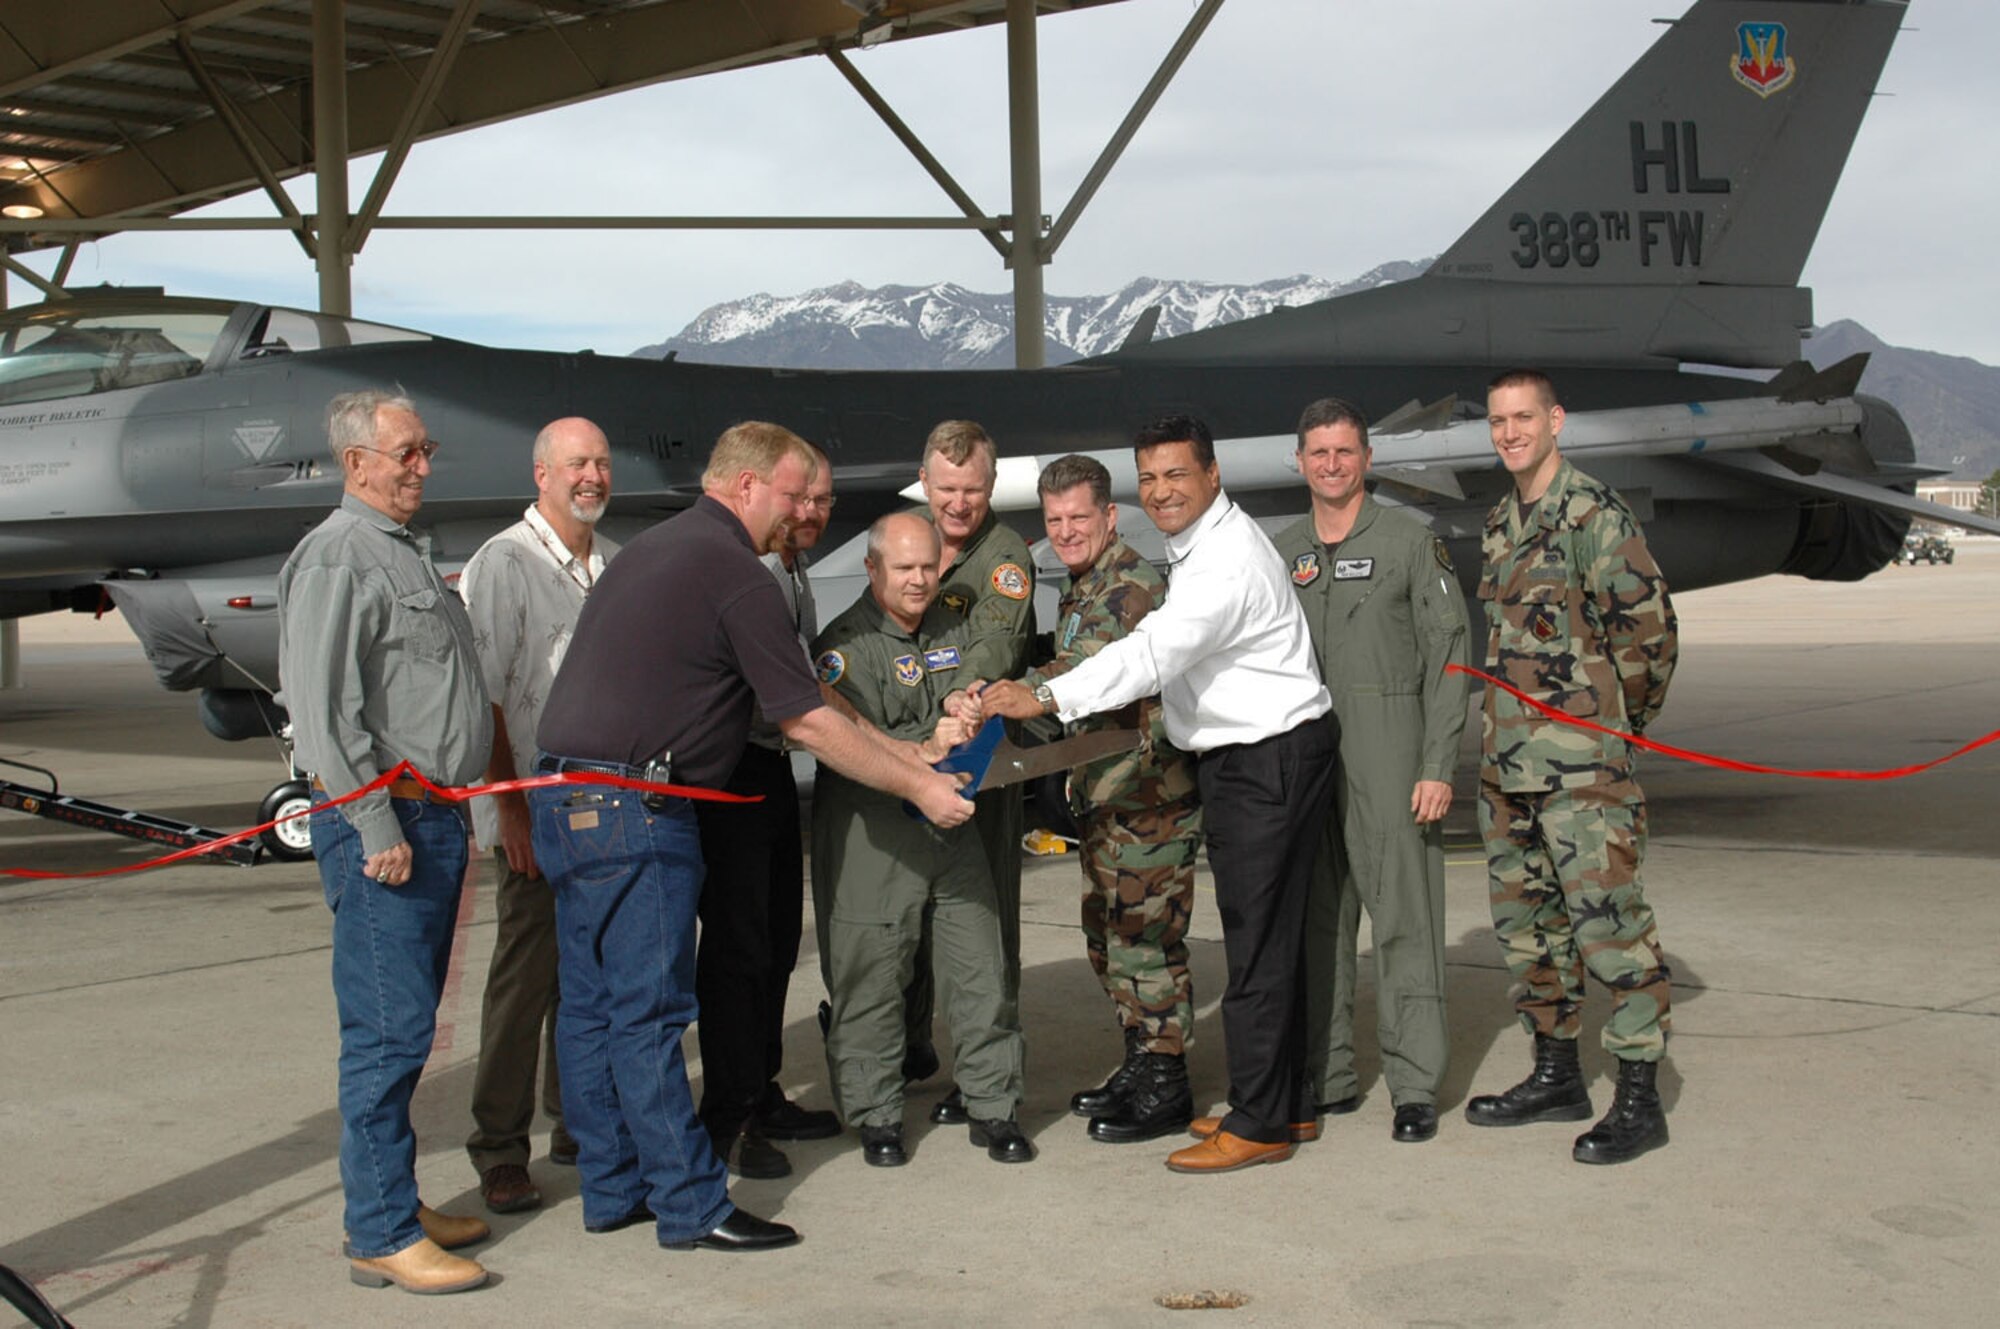 From left to right: Mr. Jerry and Tim Huffman, Richard Pra, Kevin Morgan, Brig. Gen. Charlie Lyon, Col. Al Hawley, 419th FW vice commander, Col. Scott Chambers, 75th Air Base Wing commander, Col. Robert Beletic, 388th FW commander and first Lt. Ryan LeBlanc. (U.S. Air Force photo by Airman 1st Class Stefanie Torres)